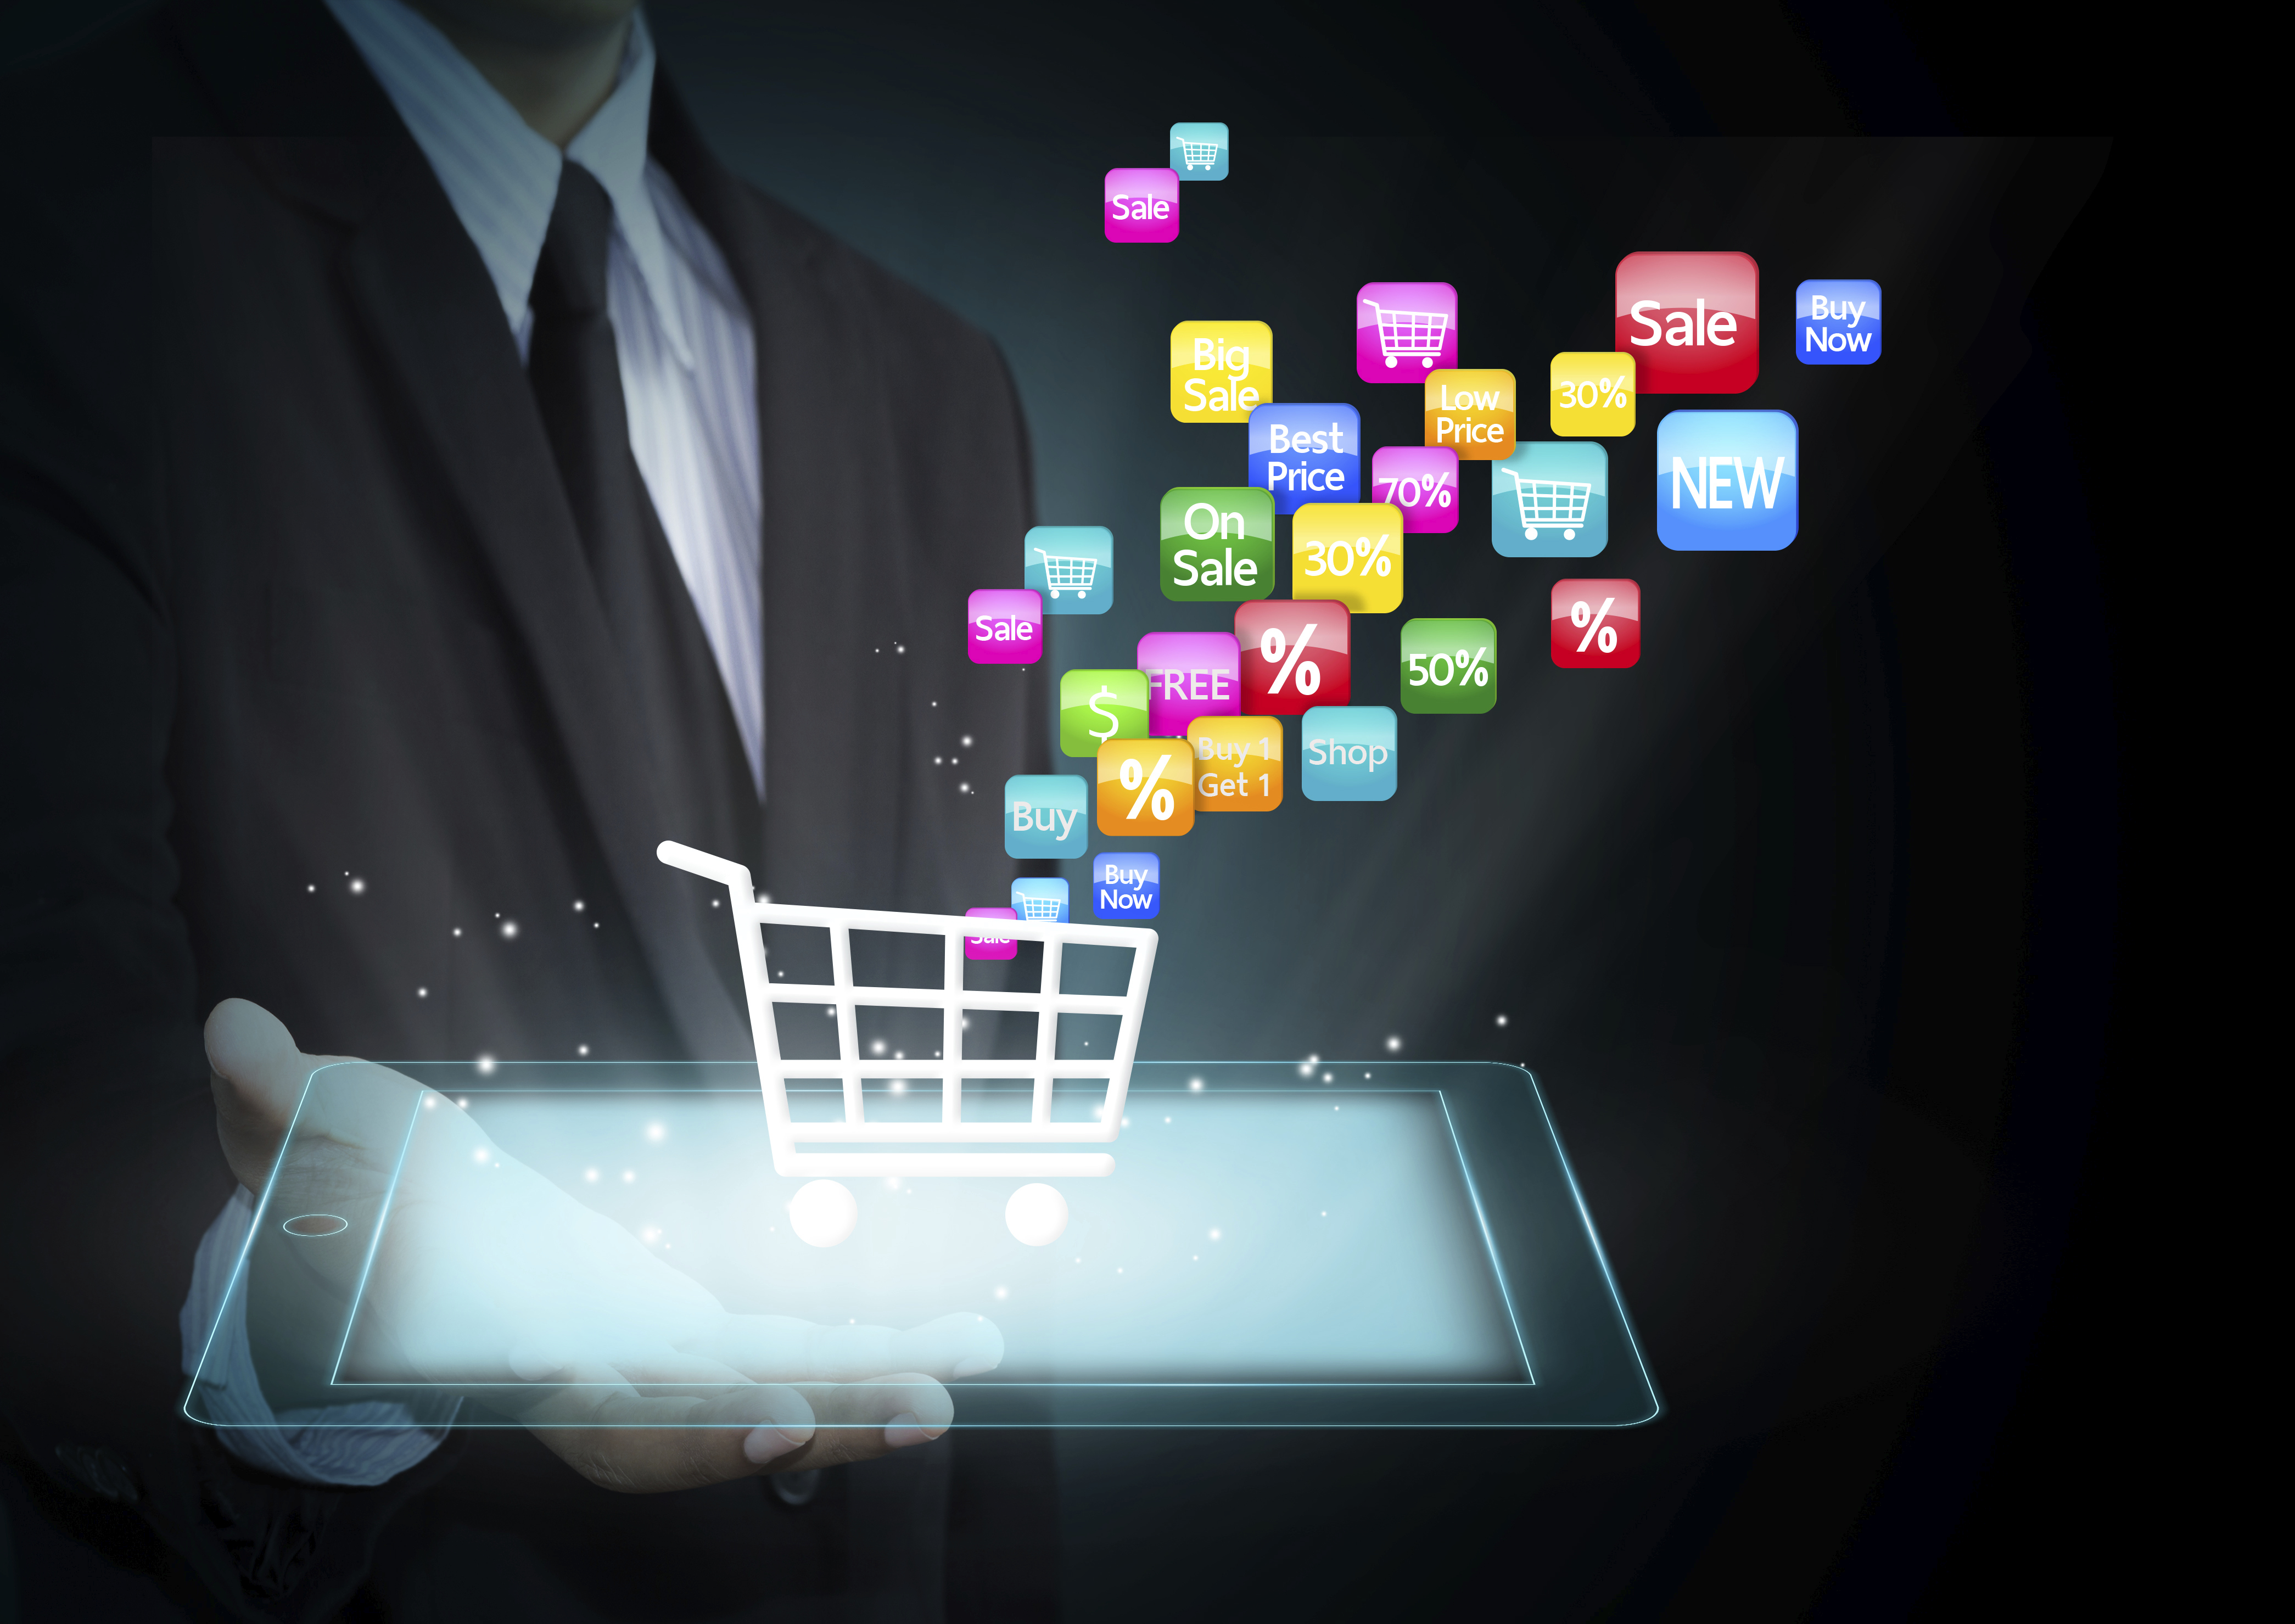 tablet Shopping cart icon 183204651